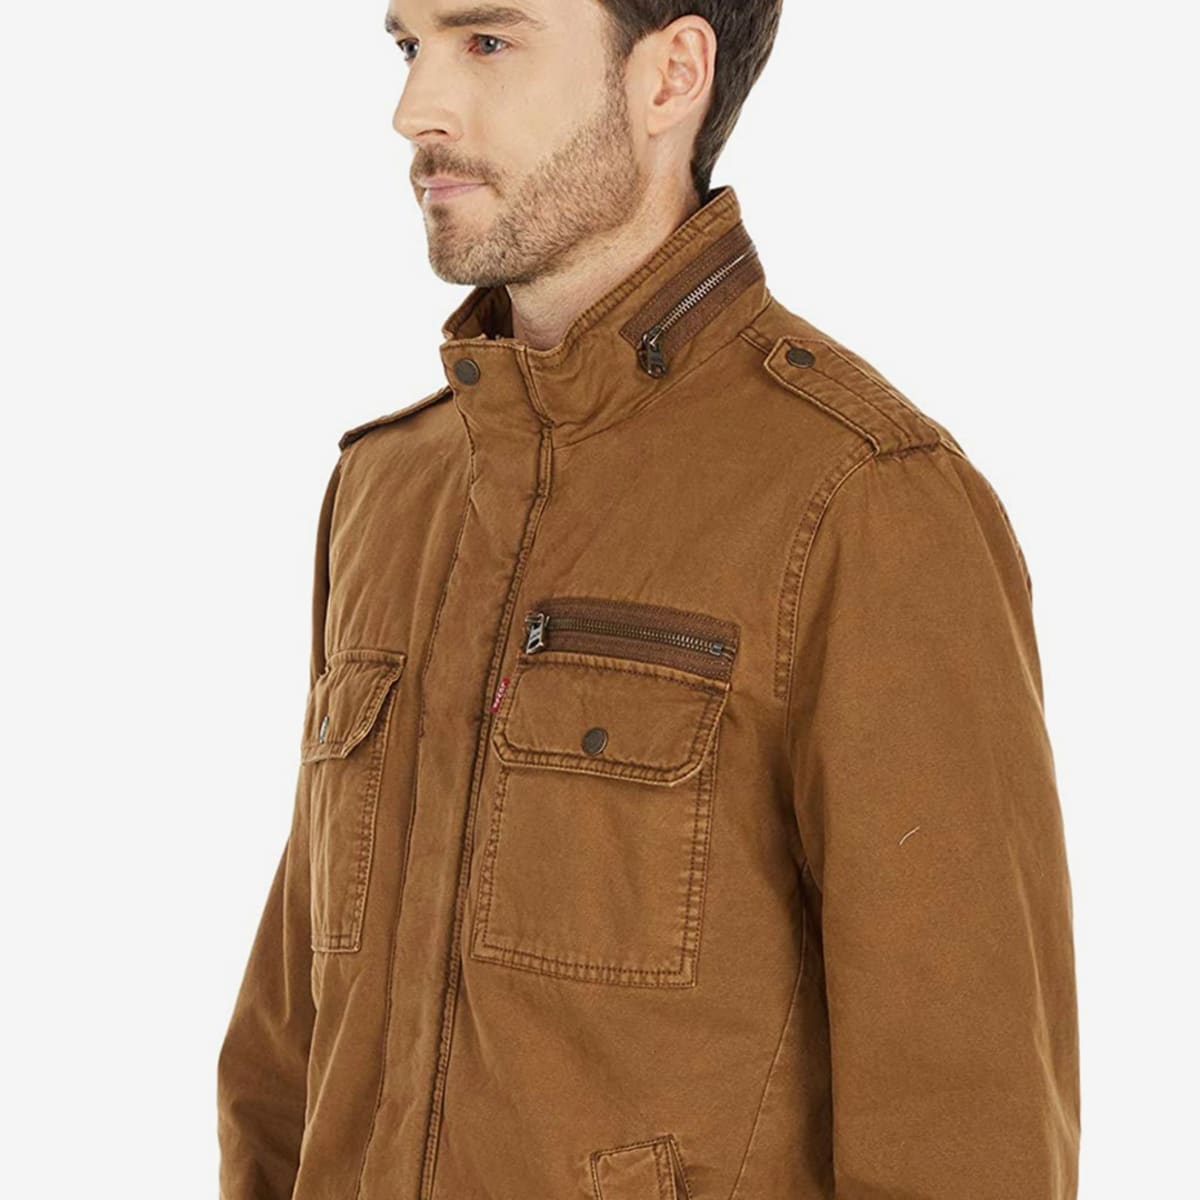 The Levi's Two-Pocket Military Jacket is Great for Your Winter Fashion  Needs - Men's Journal